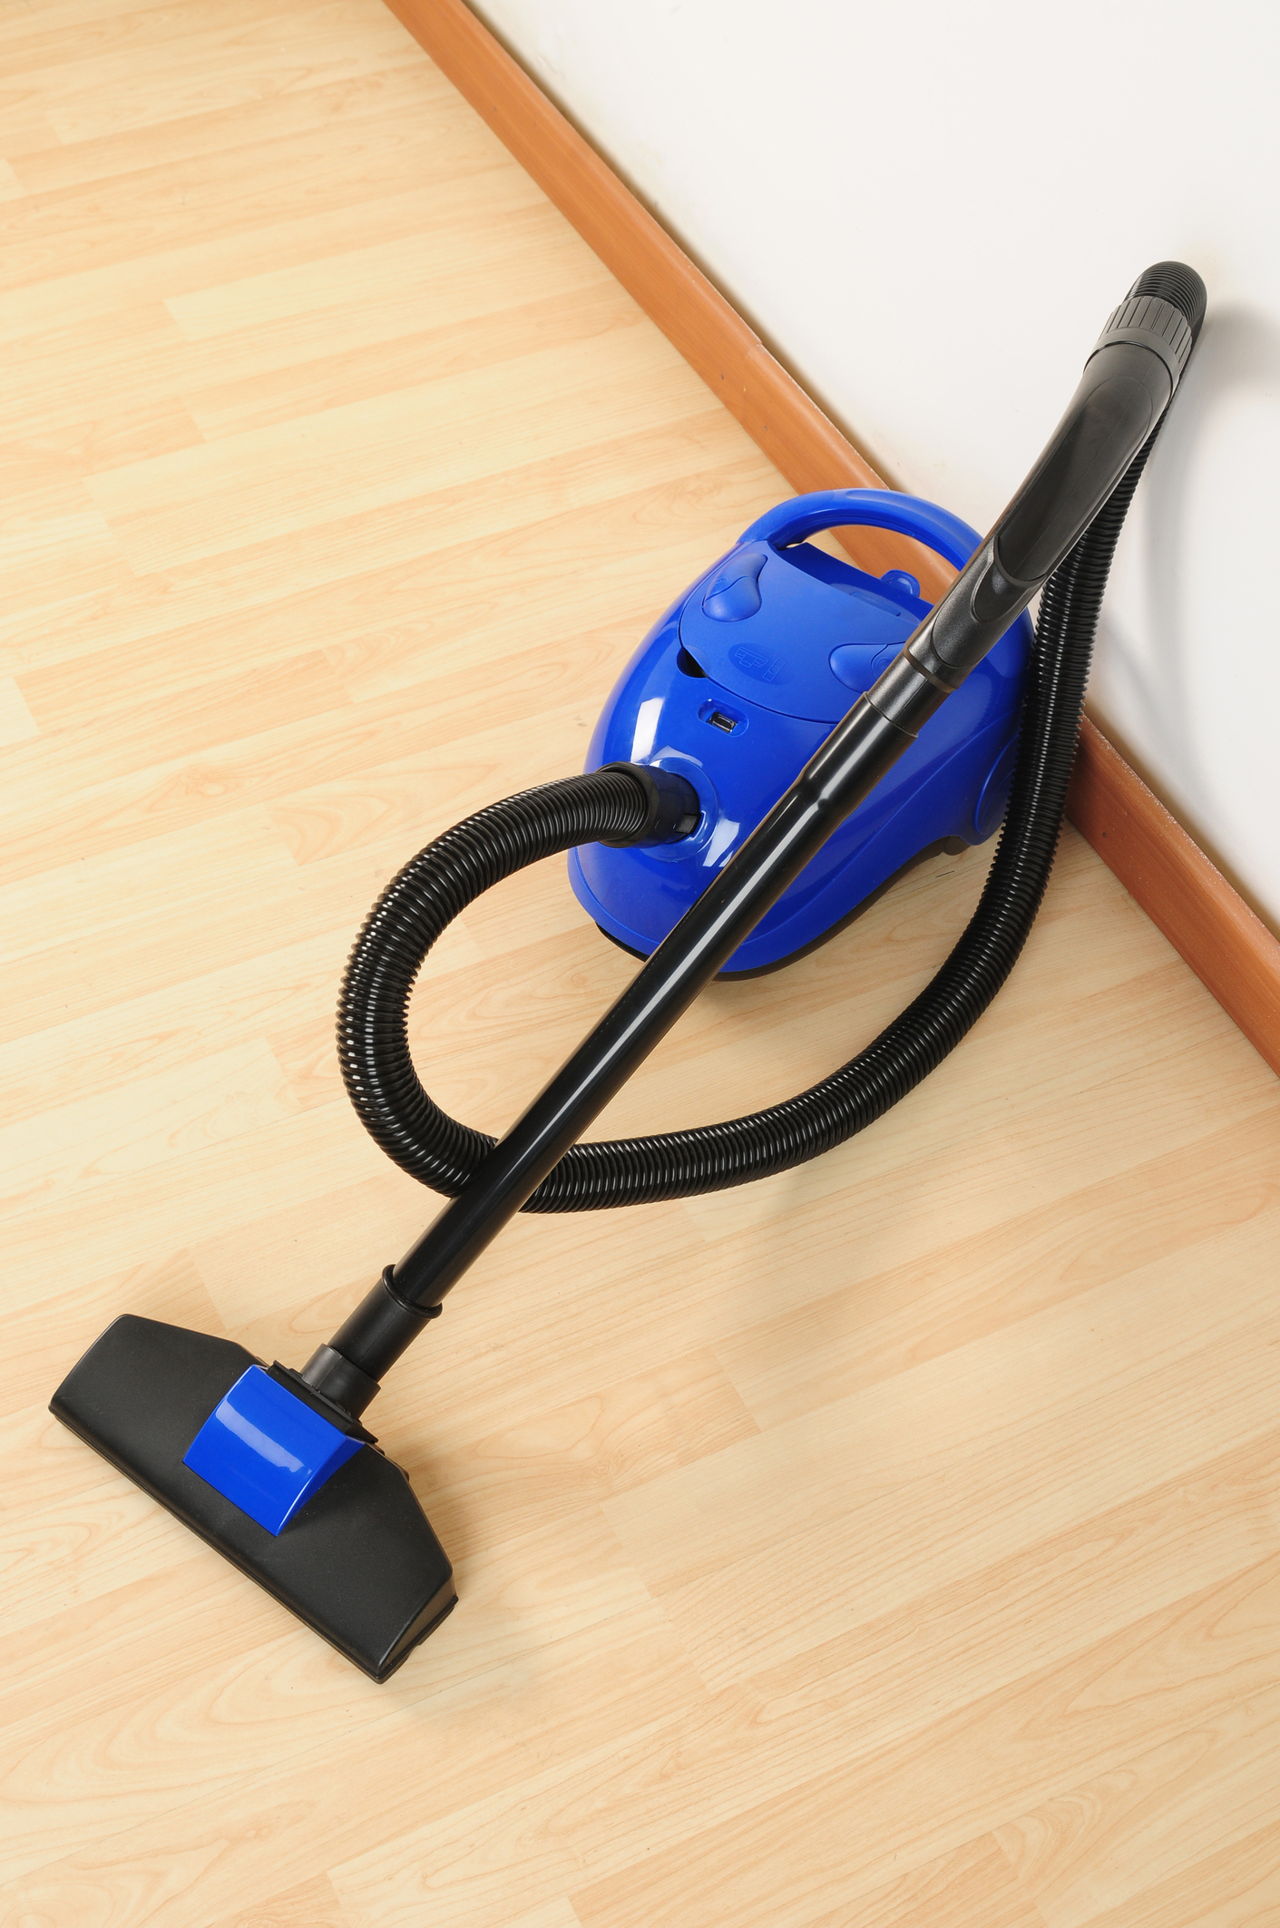 Clean Laminate Floors Without Streaking, Cleaning Laminate Wood Floors Without Streaks